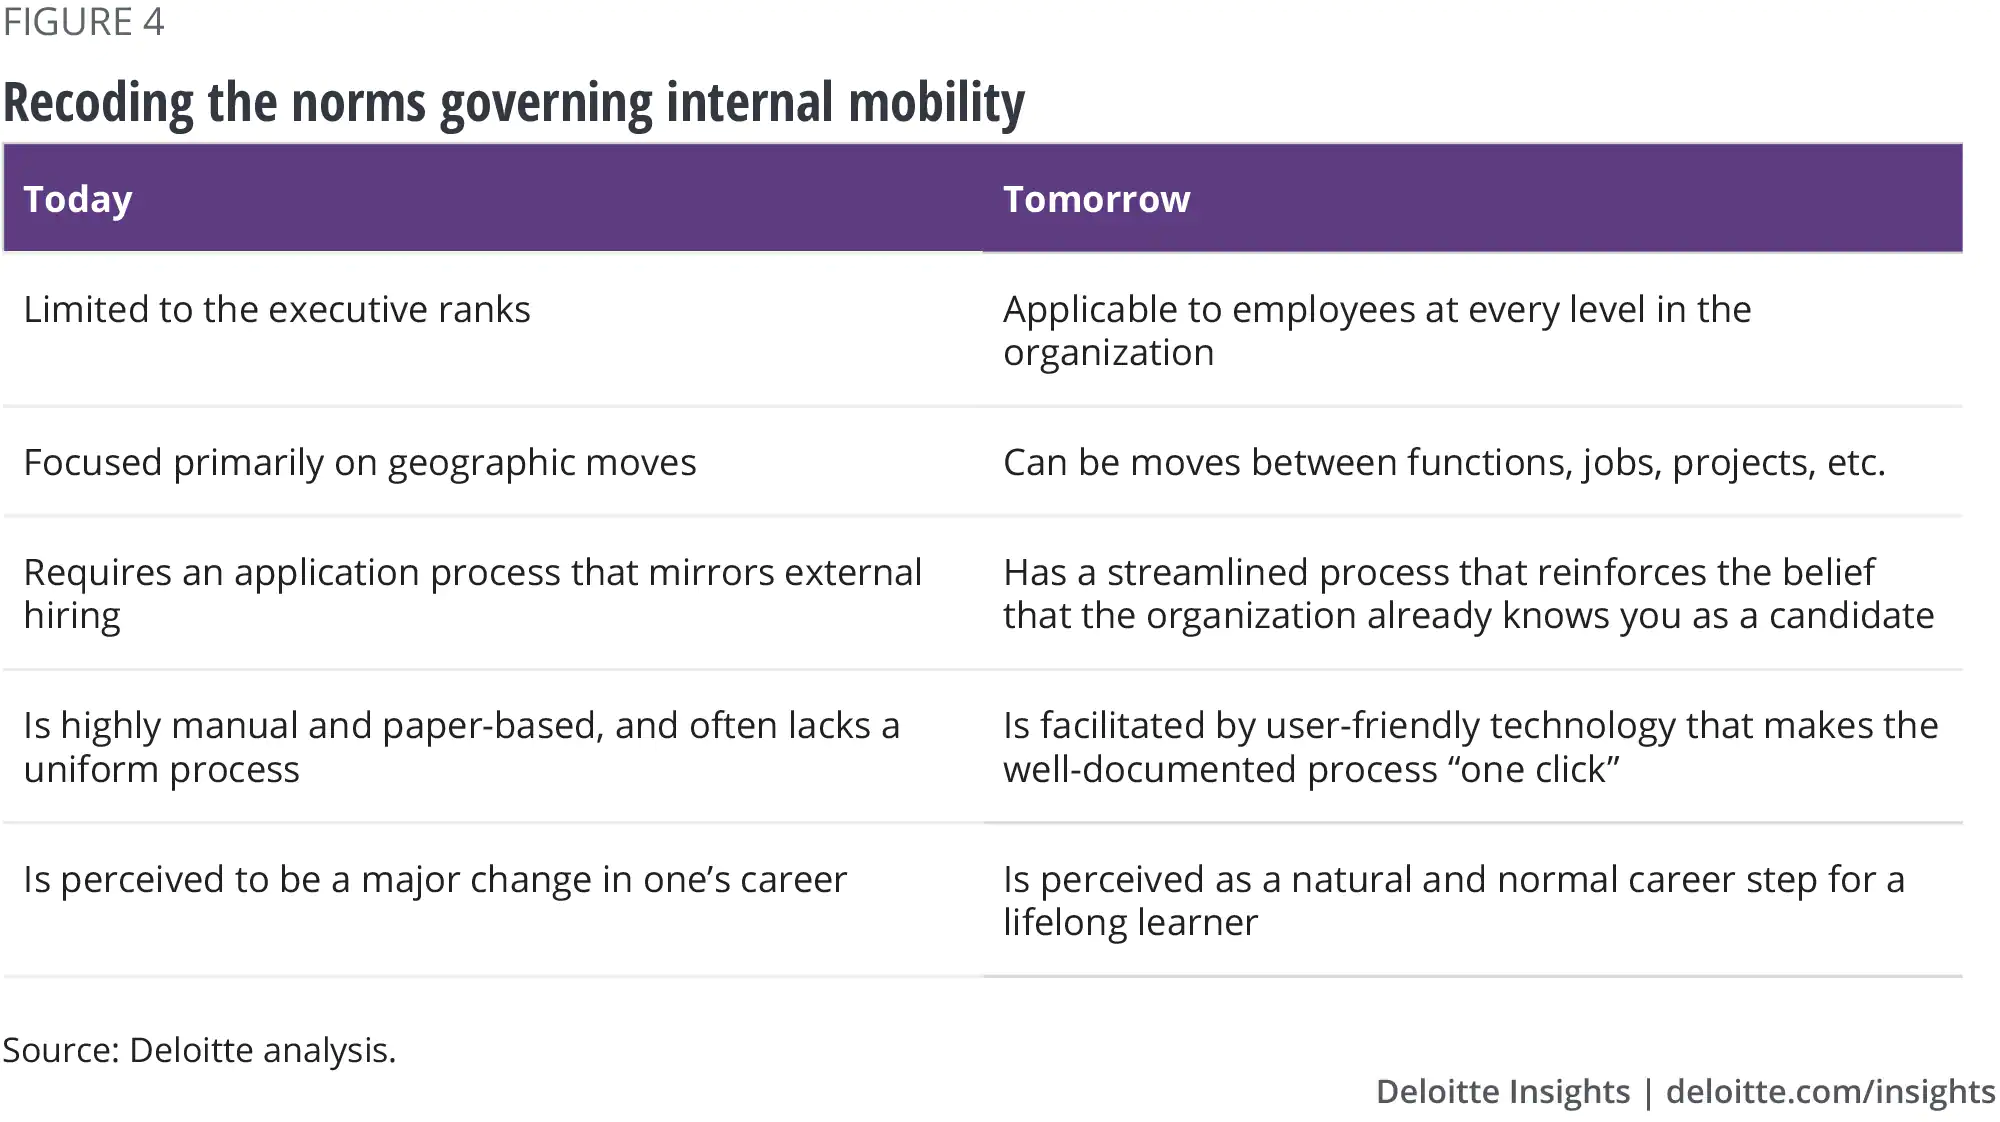 Enabling internal mobility has broader benefits today for employees' career paths.